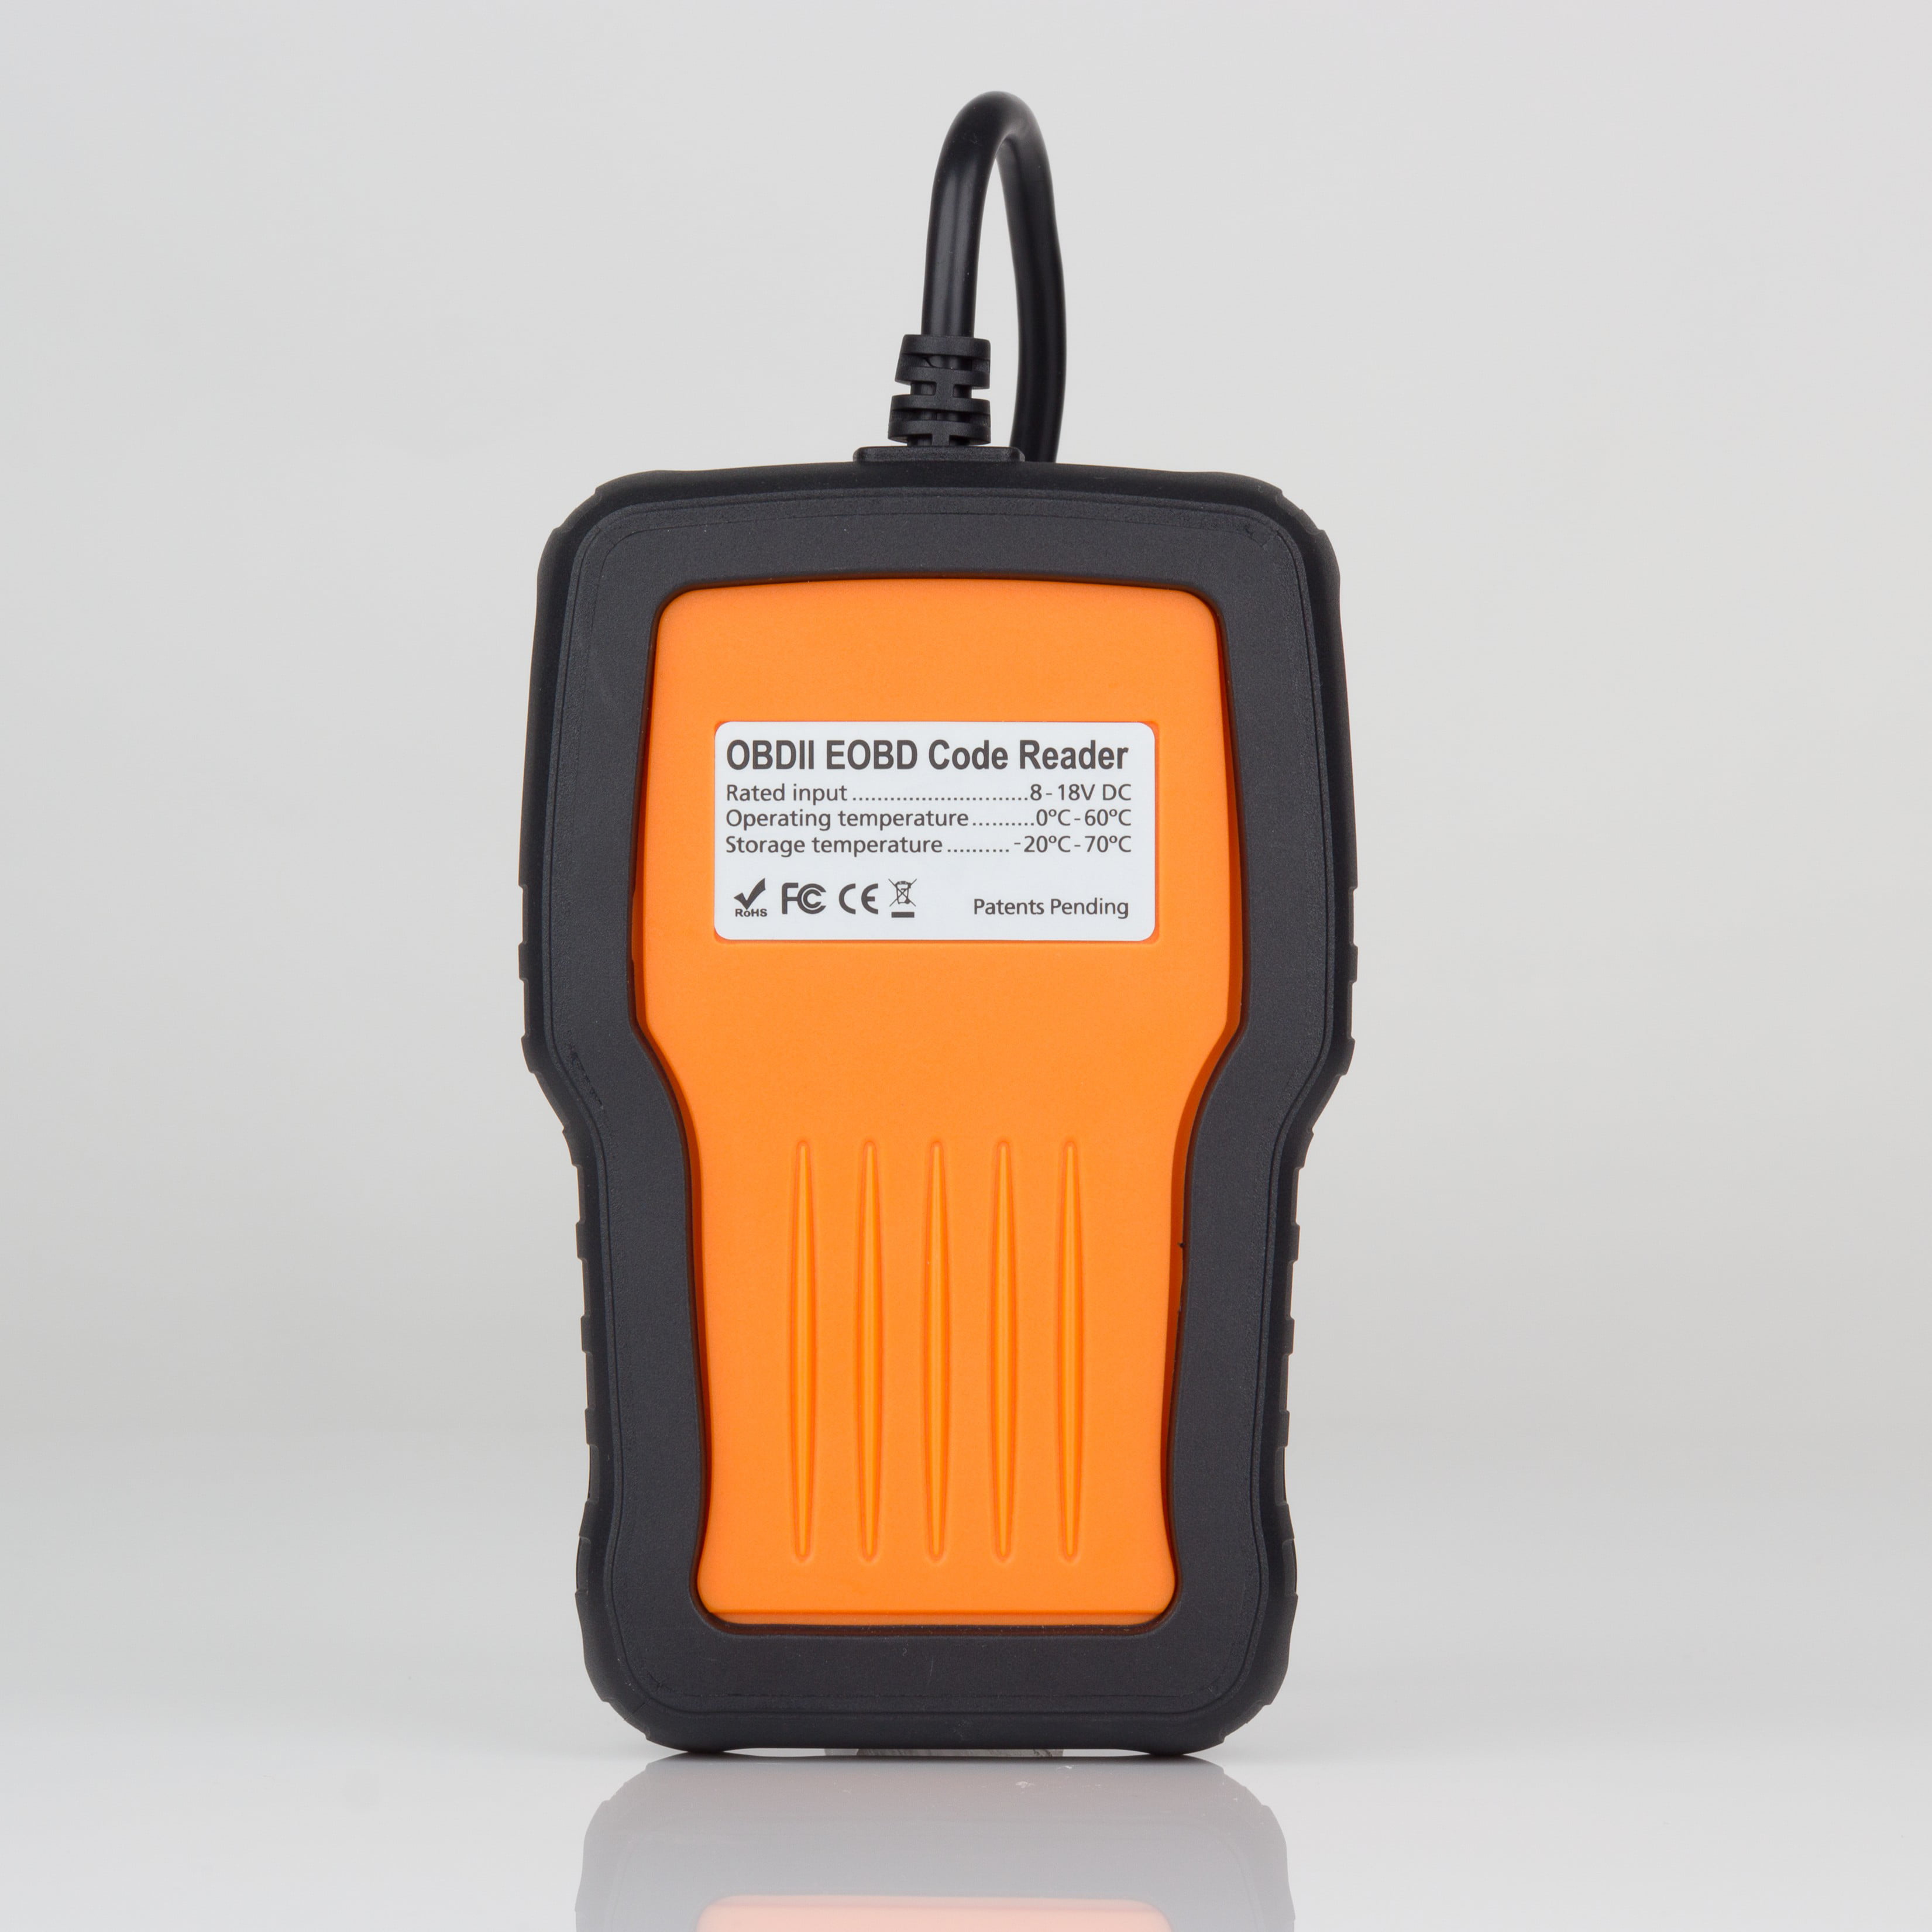 Foxwell NT301 OBD2 & EOBD Scanner Professional Enhanced Diagnostic Code  Reader Tool Upgraded Version Of NT201